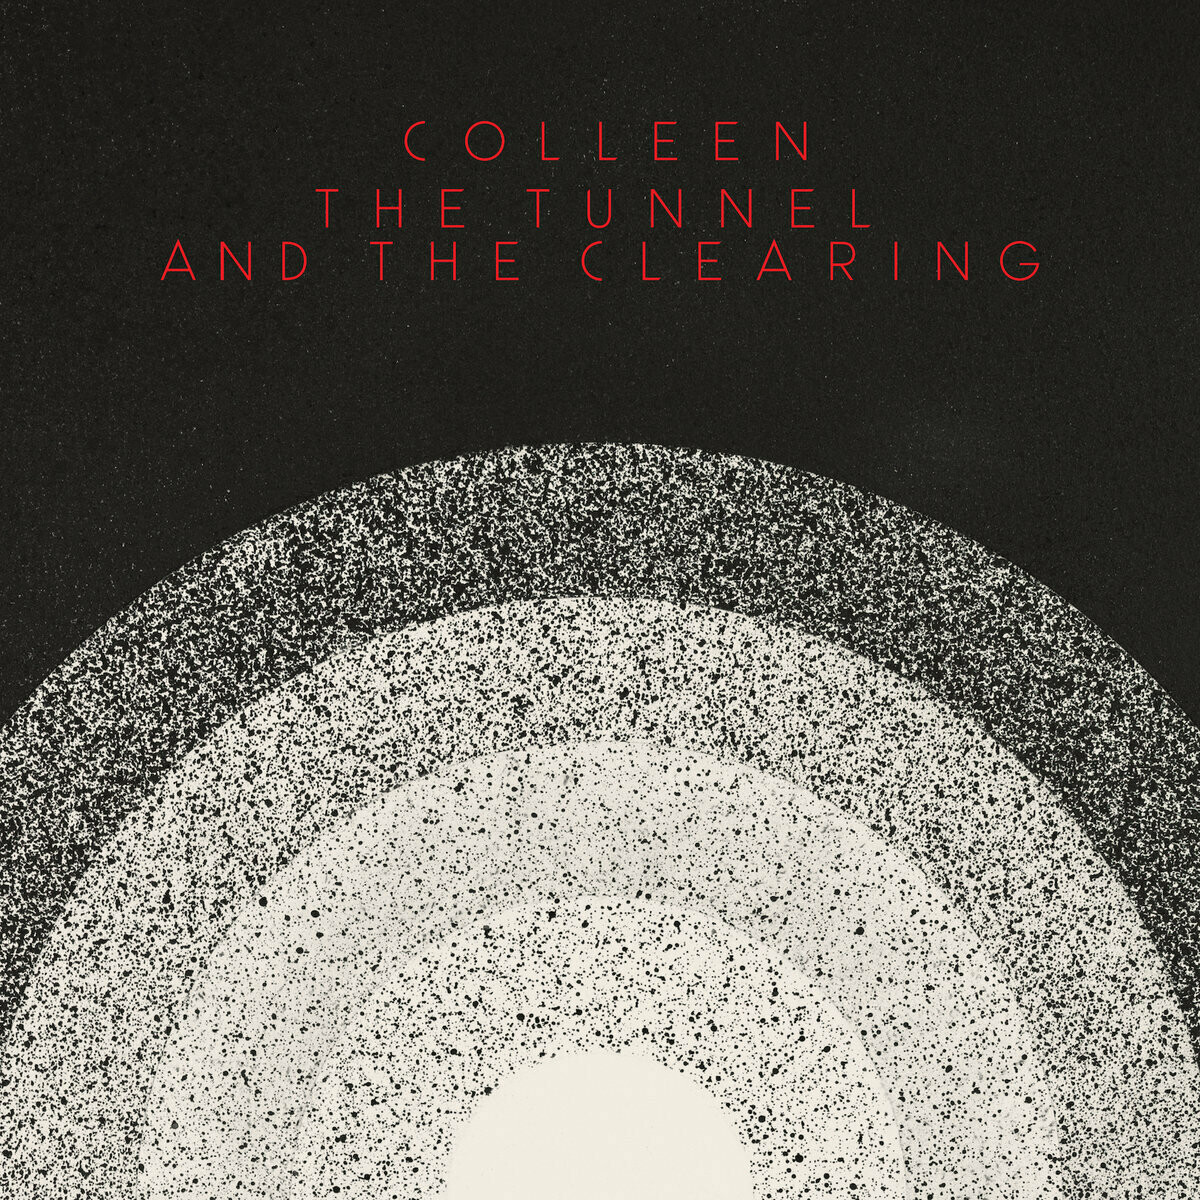 Colleen "The Tunnel And The Clearing"